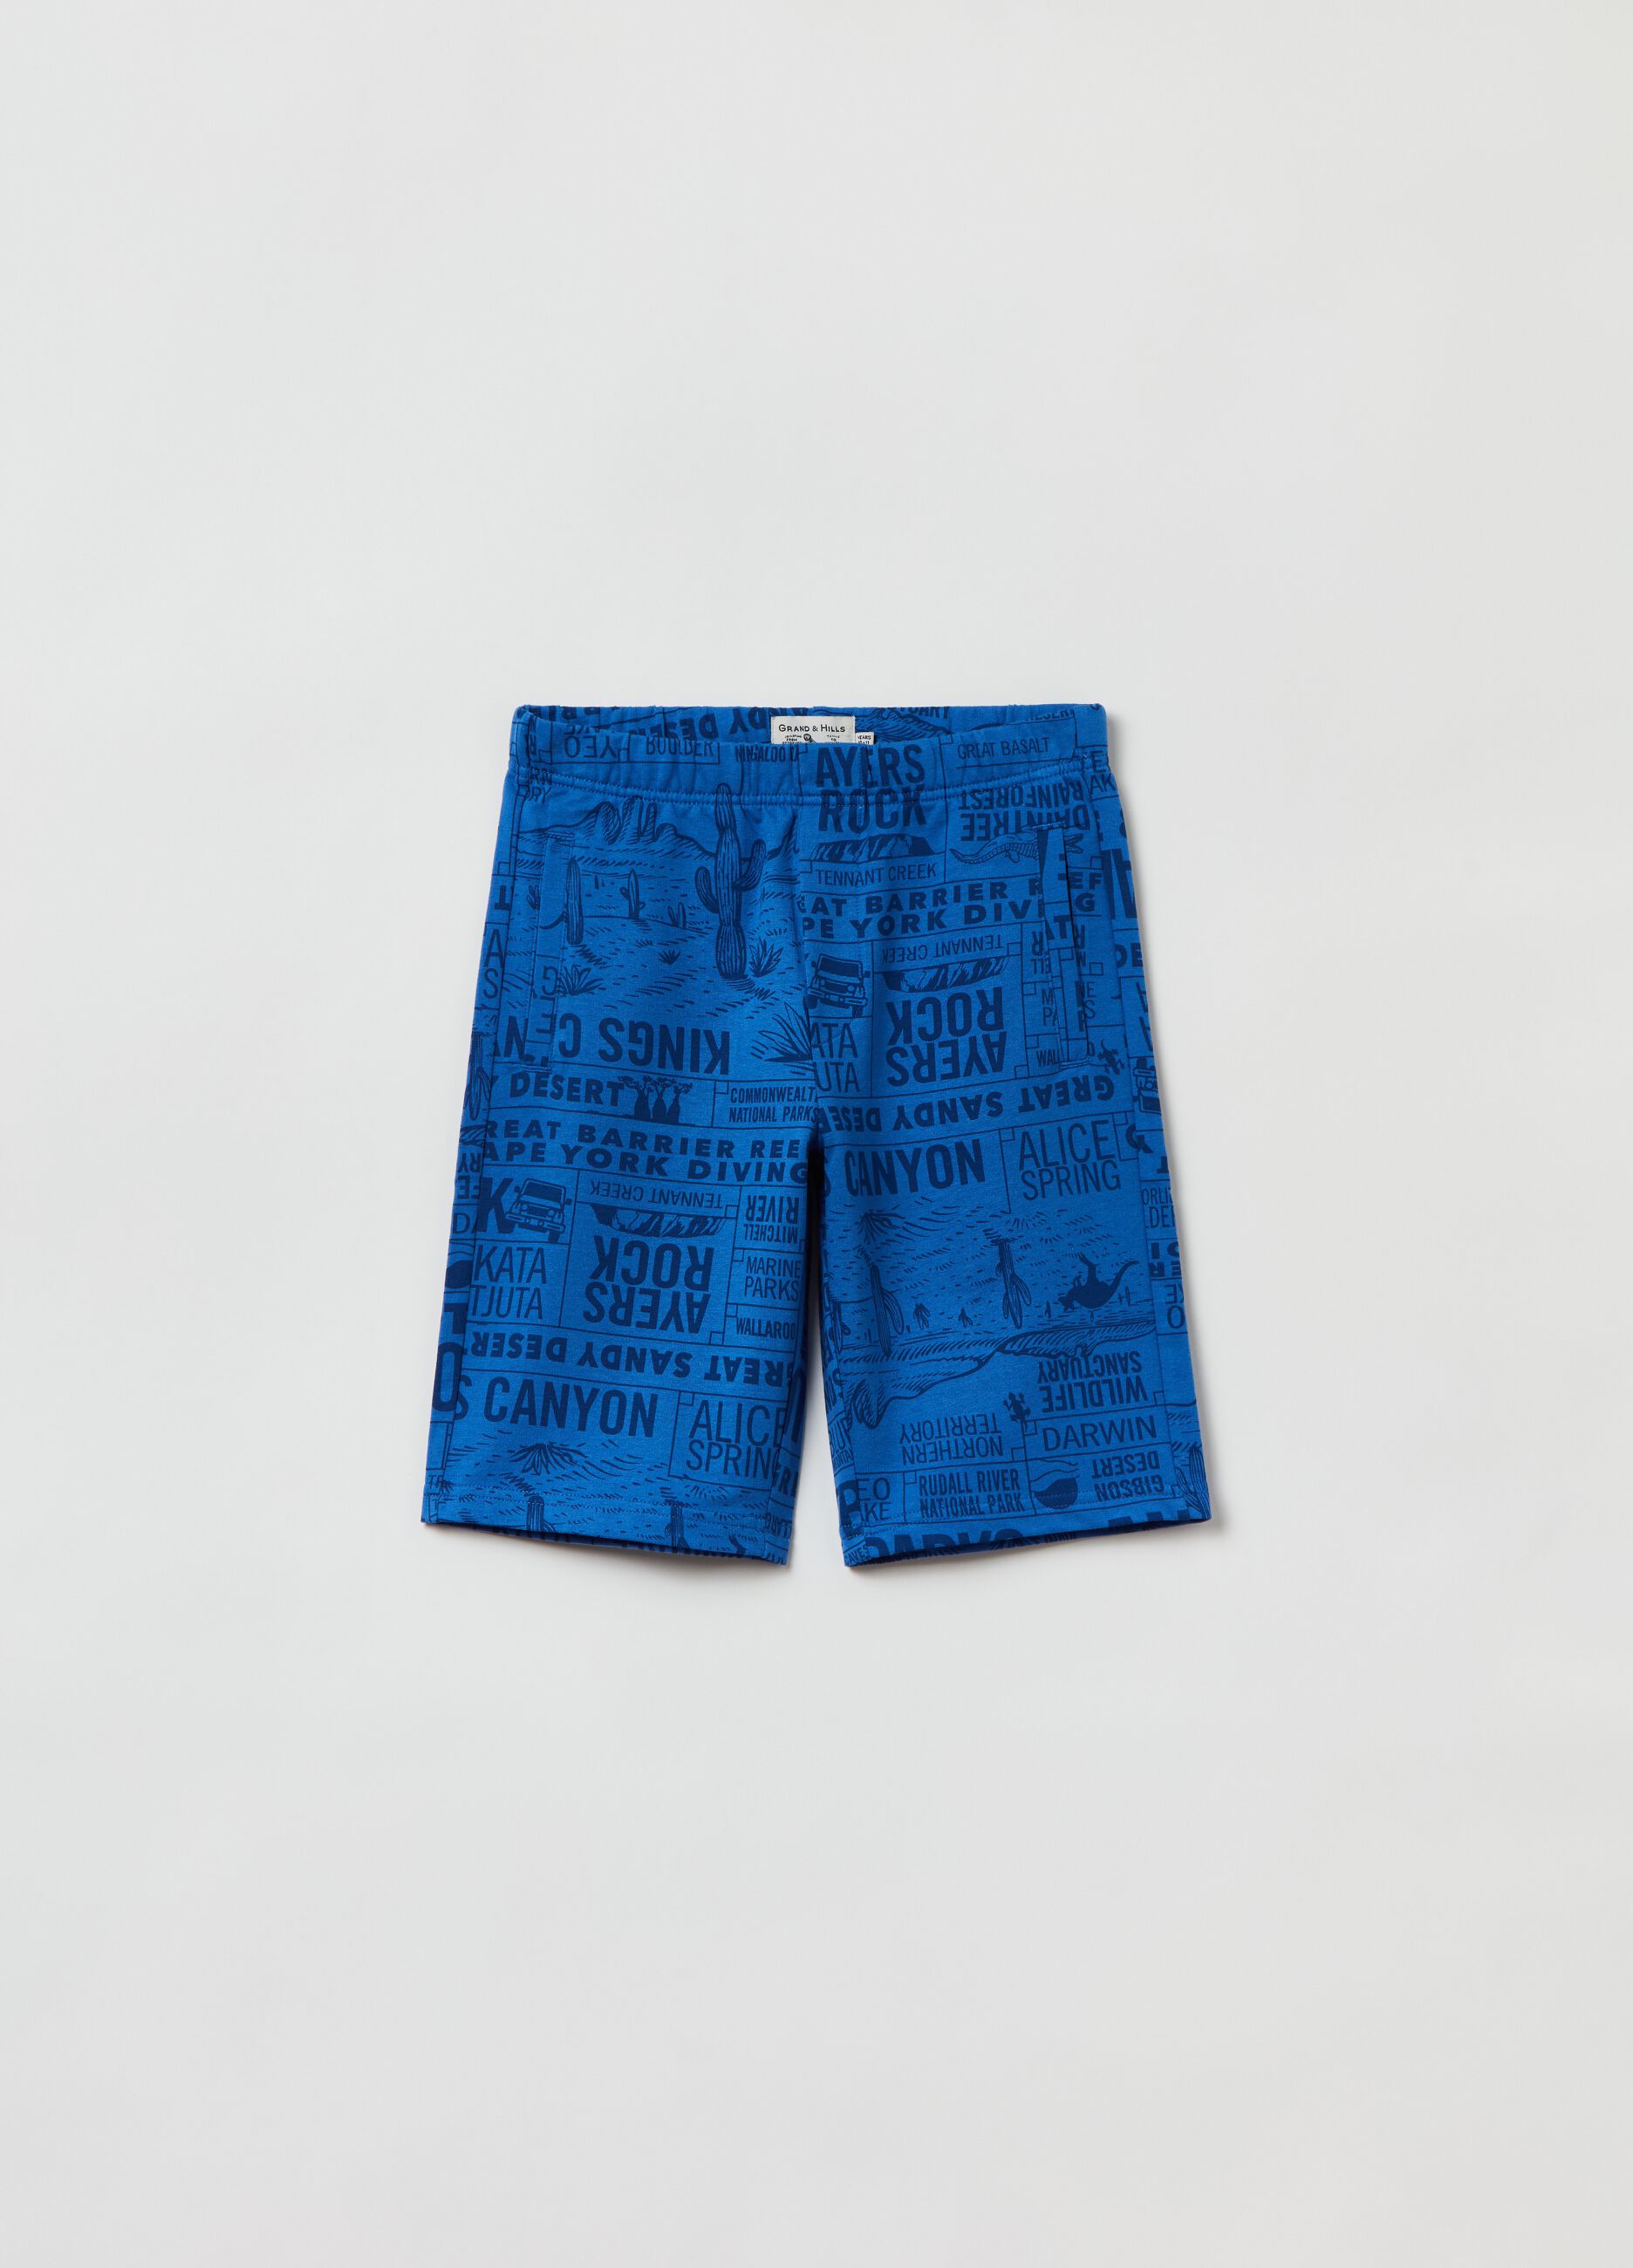 Grand&Hills cotton shorts with print